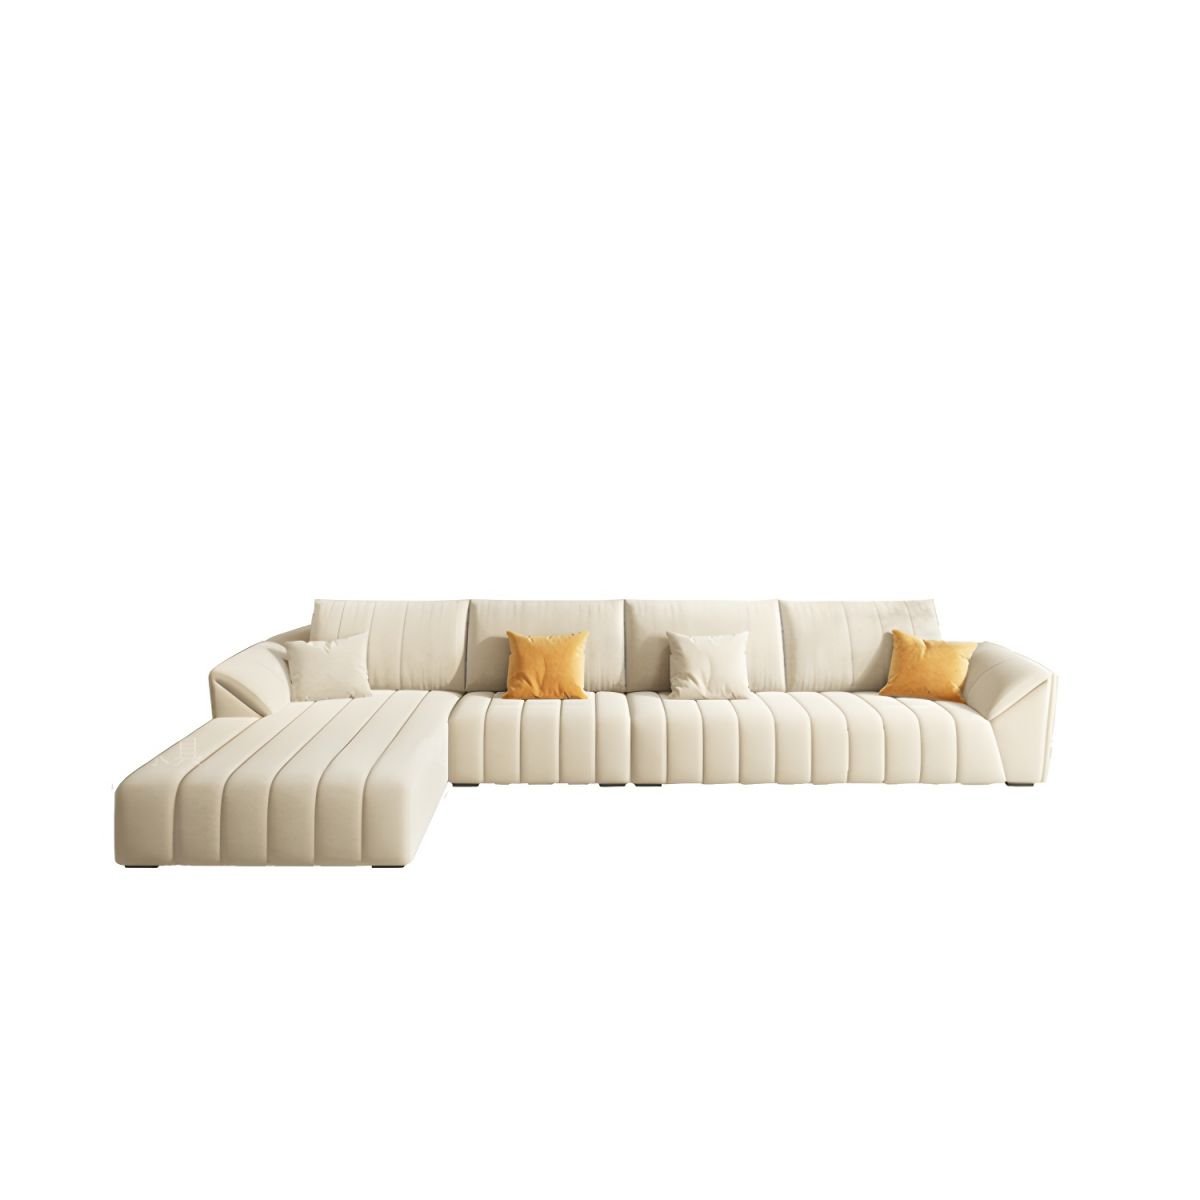 Contemporary Off-White L-Shaped Sofa & Chaise with Bolster Pillows - 145"L x 71"W x 37"H Milk Fleece Left